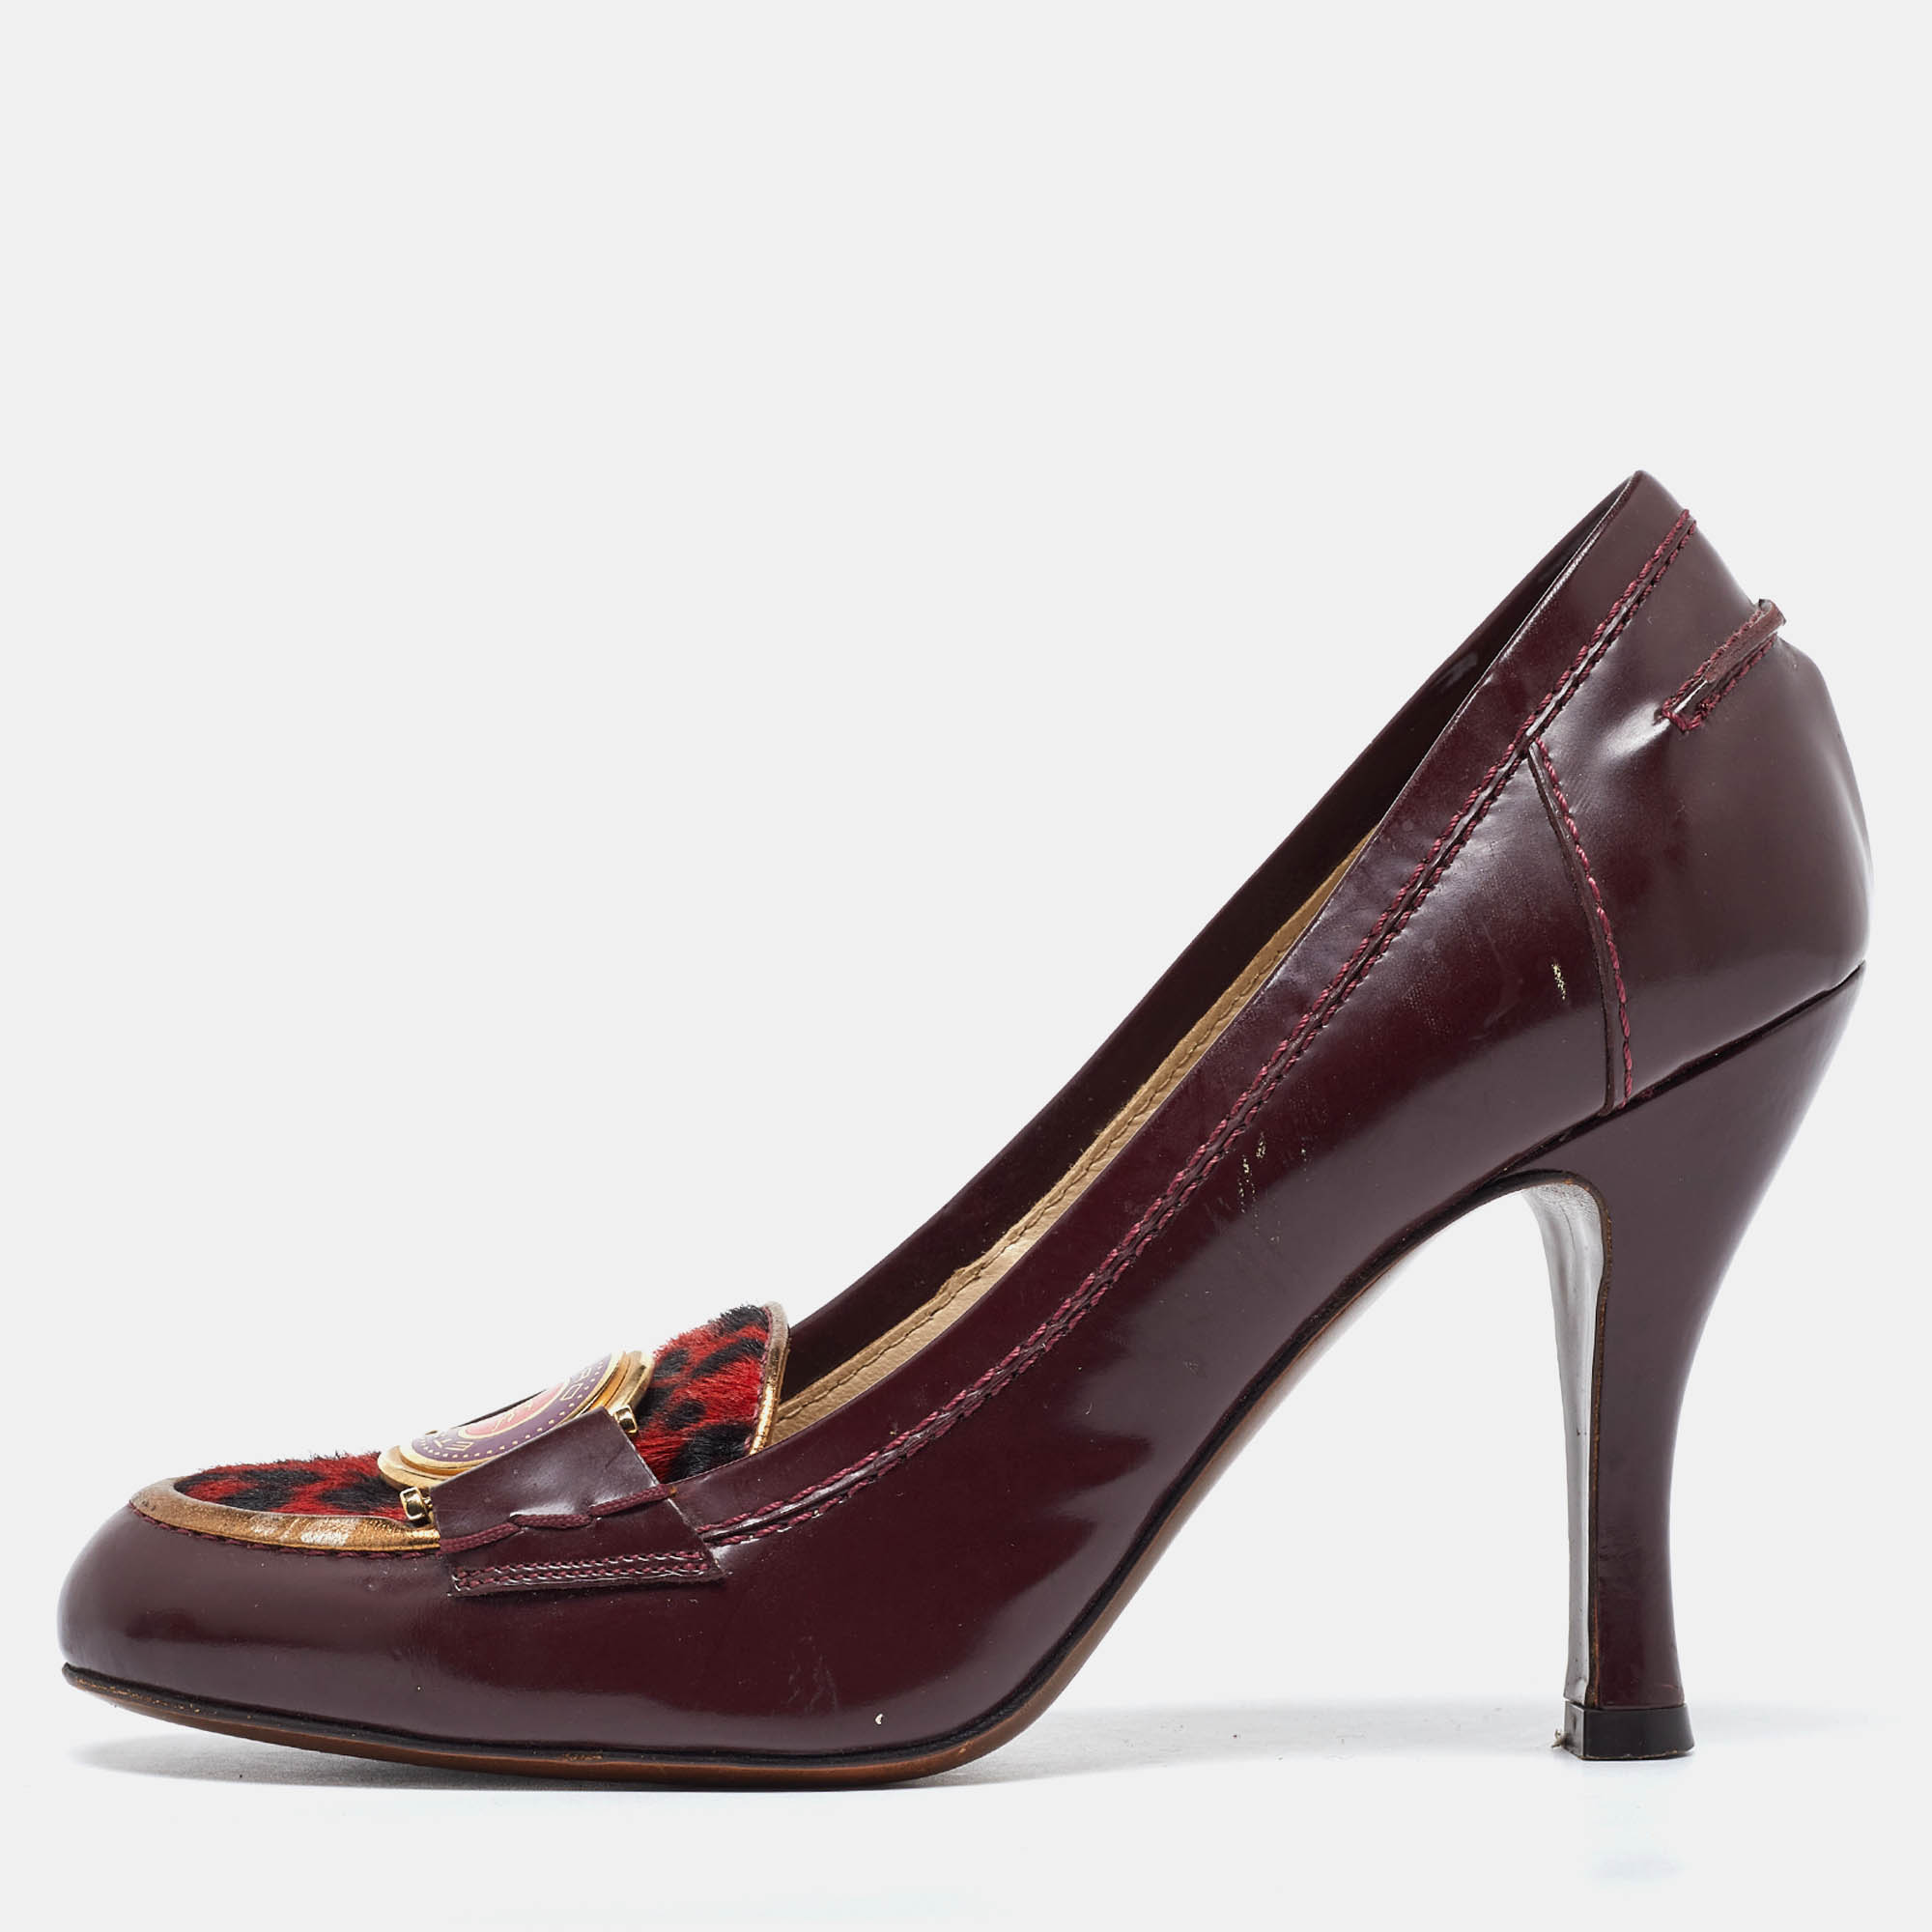 Etro burgundy/red leather and velvet pumps size 36